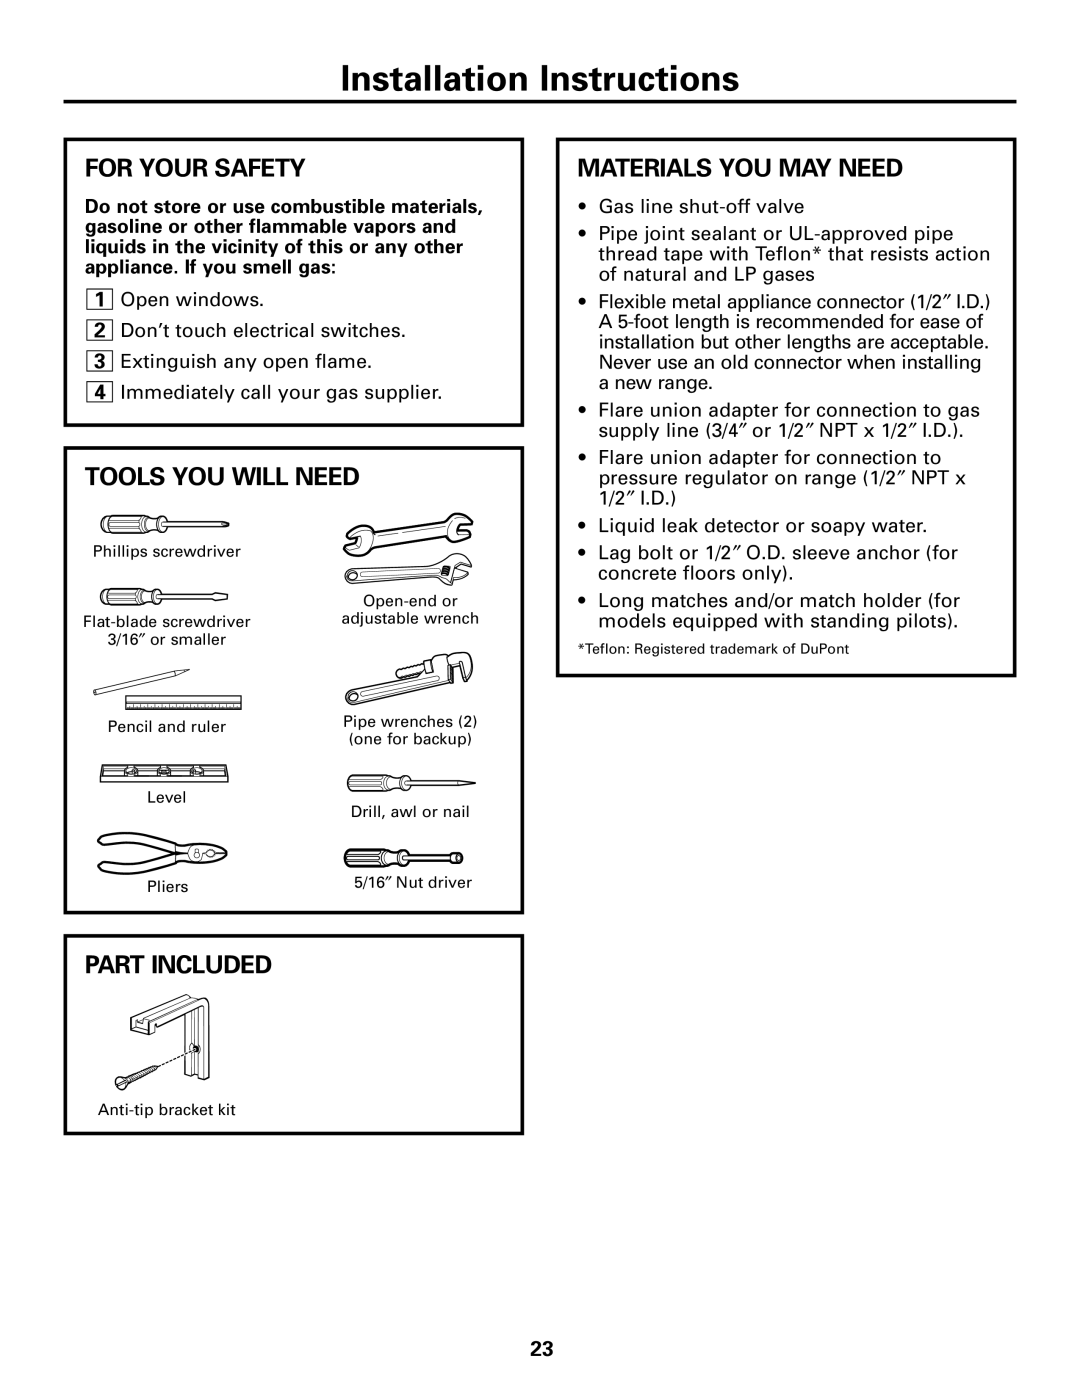 Hotpoint RGA720 Installation Instructions, For Your Safety, Tools You Will Need, Part Included, Materials You May Need 